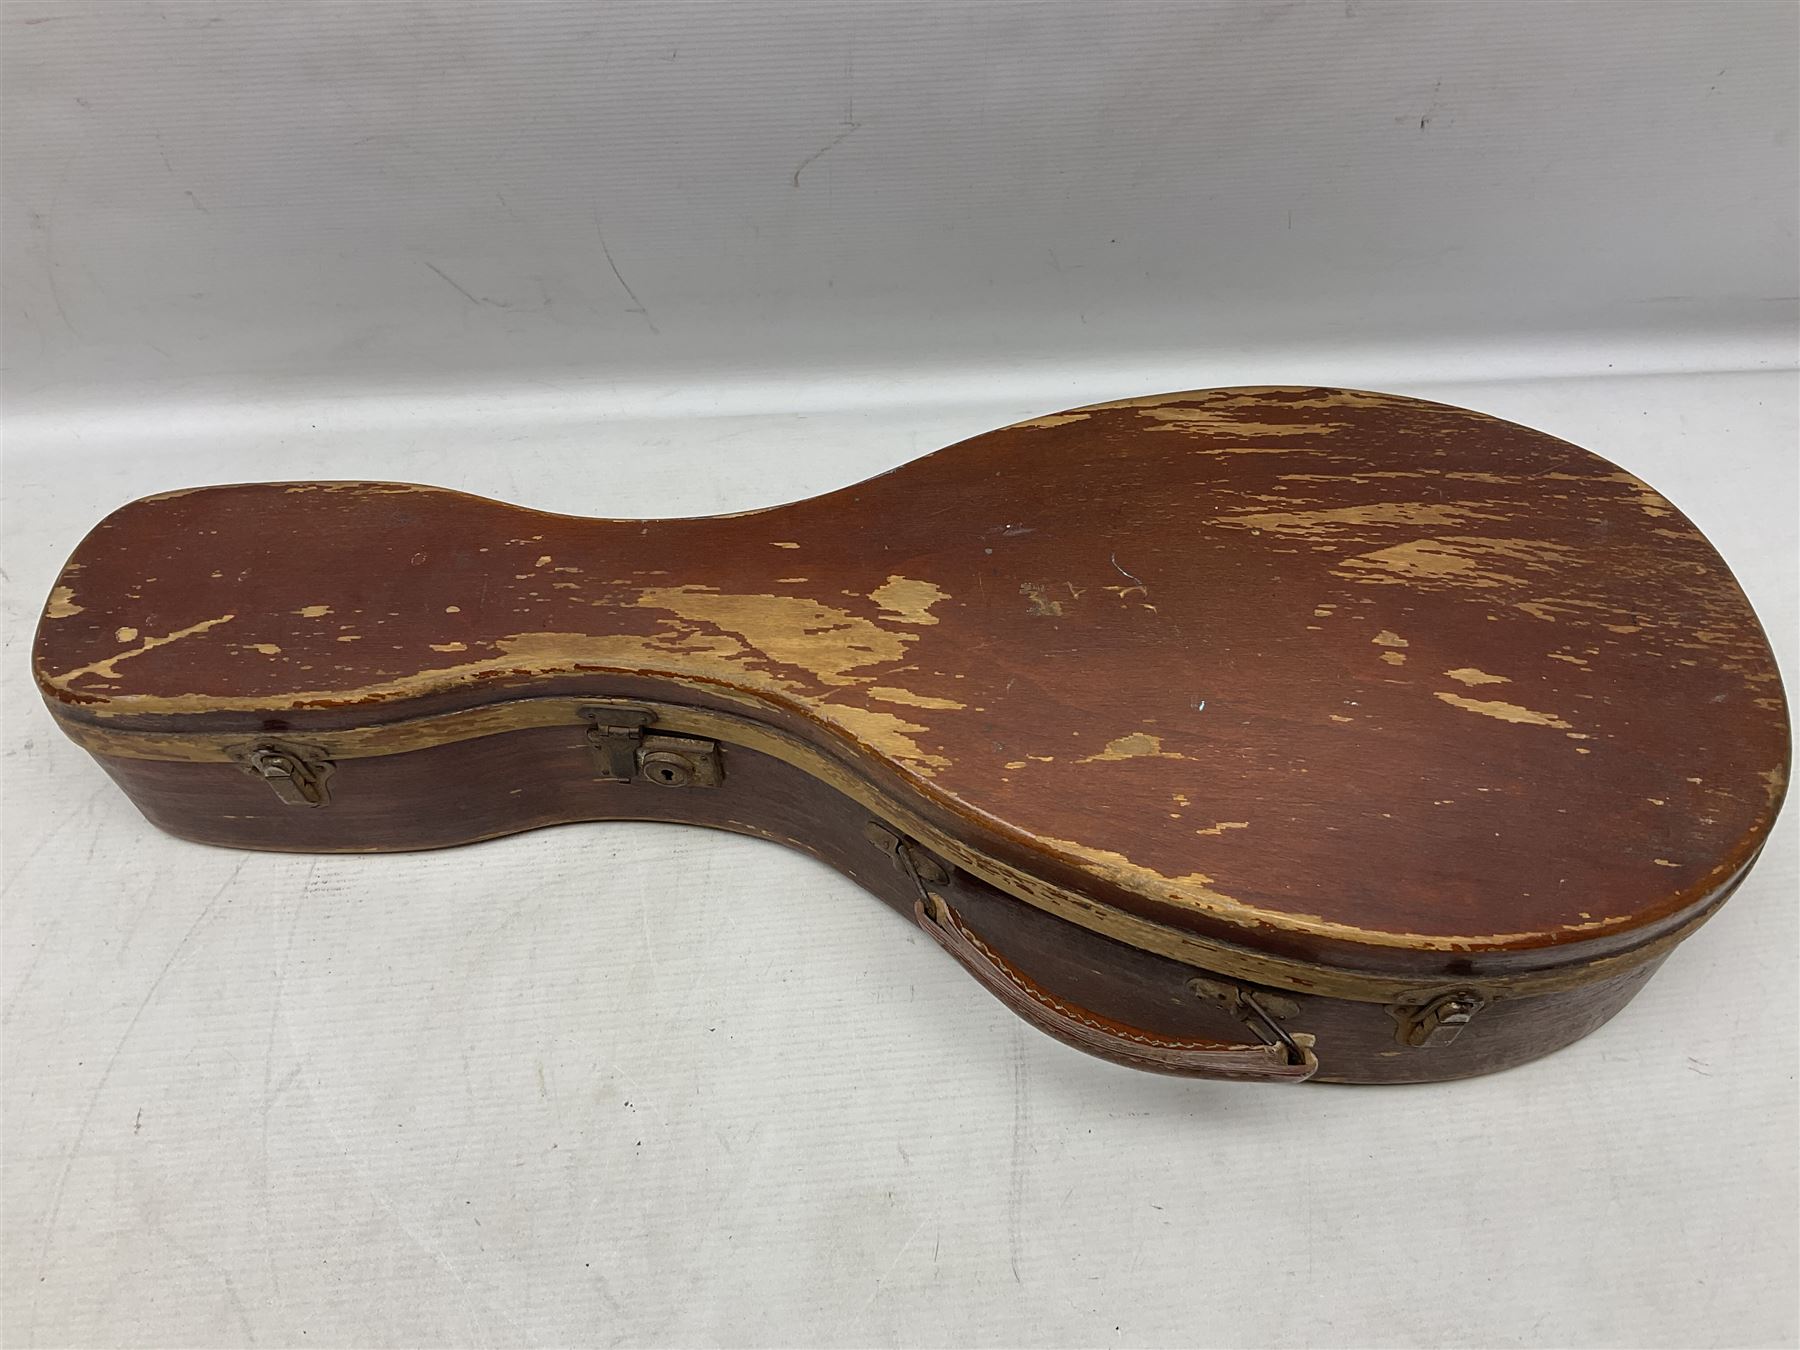 Early 20th century Italian Rafaele Disantino eight-string mandolin with two-piece back and spruce to - Image 14 of 14